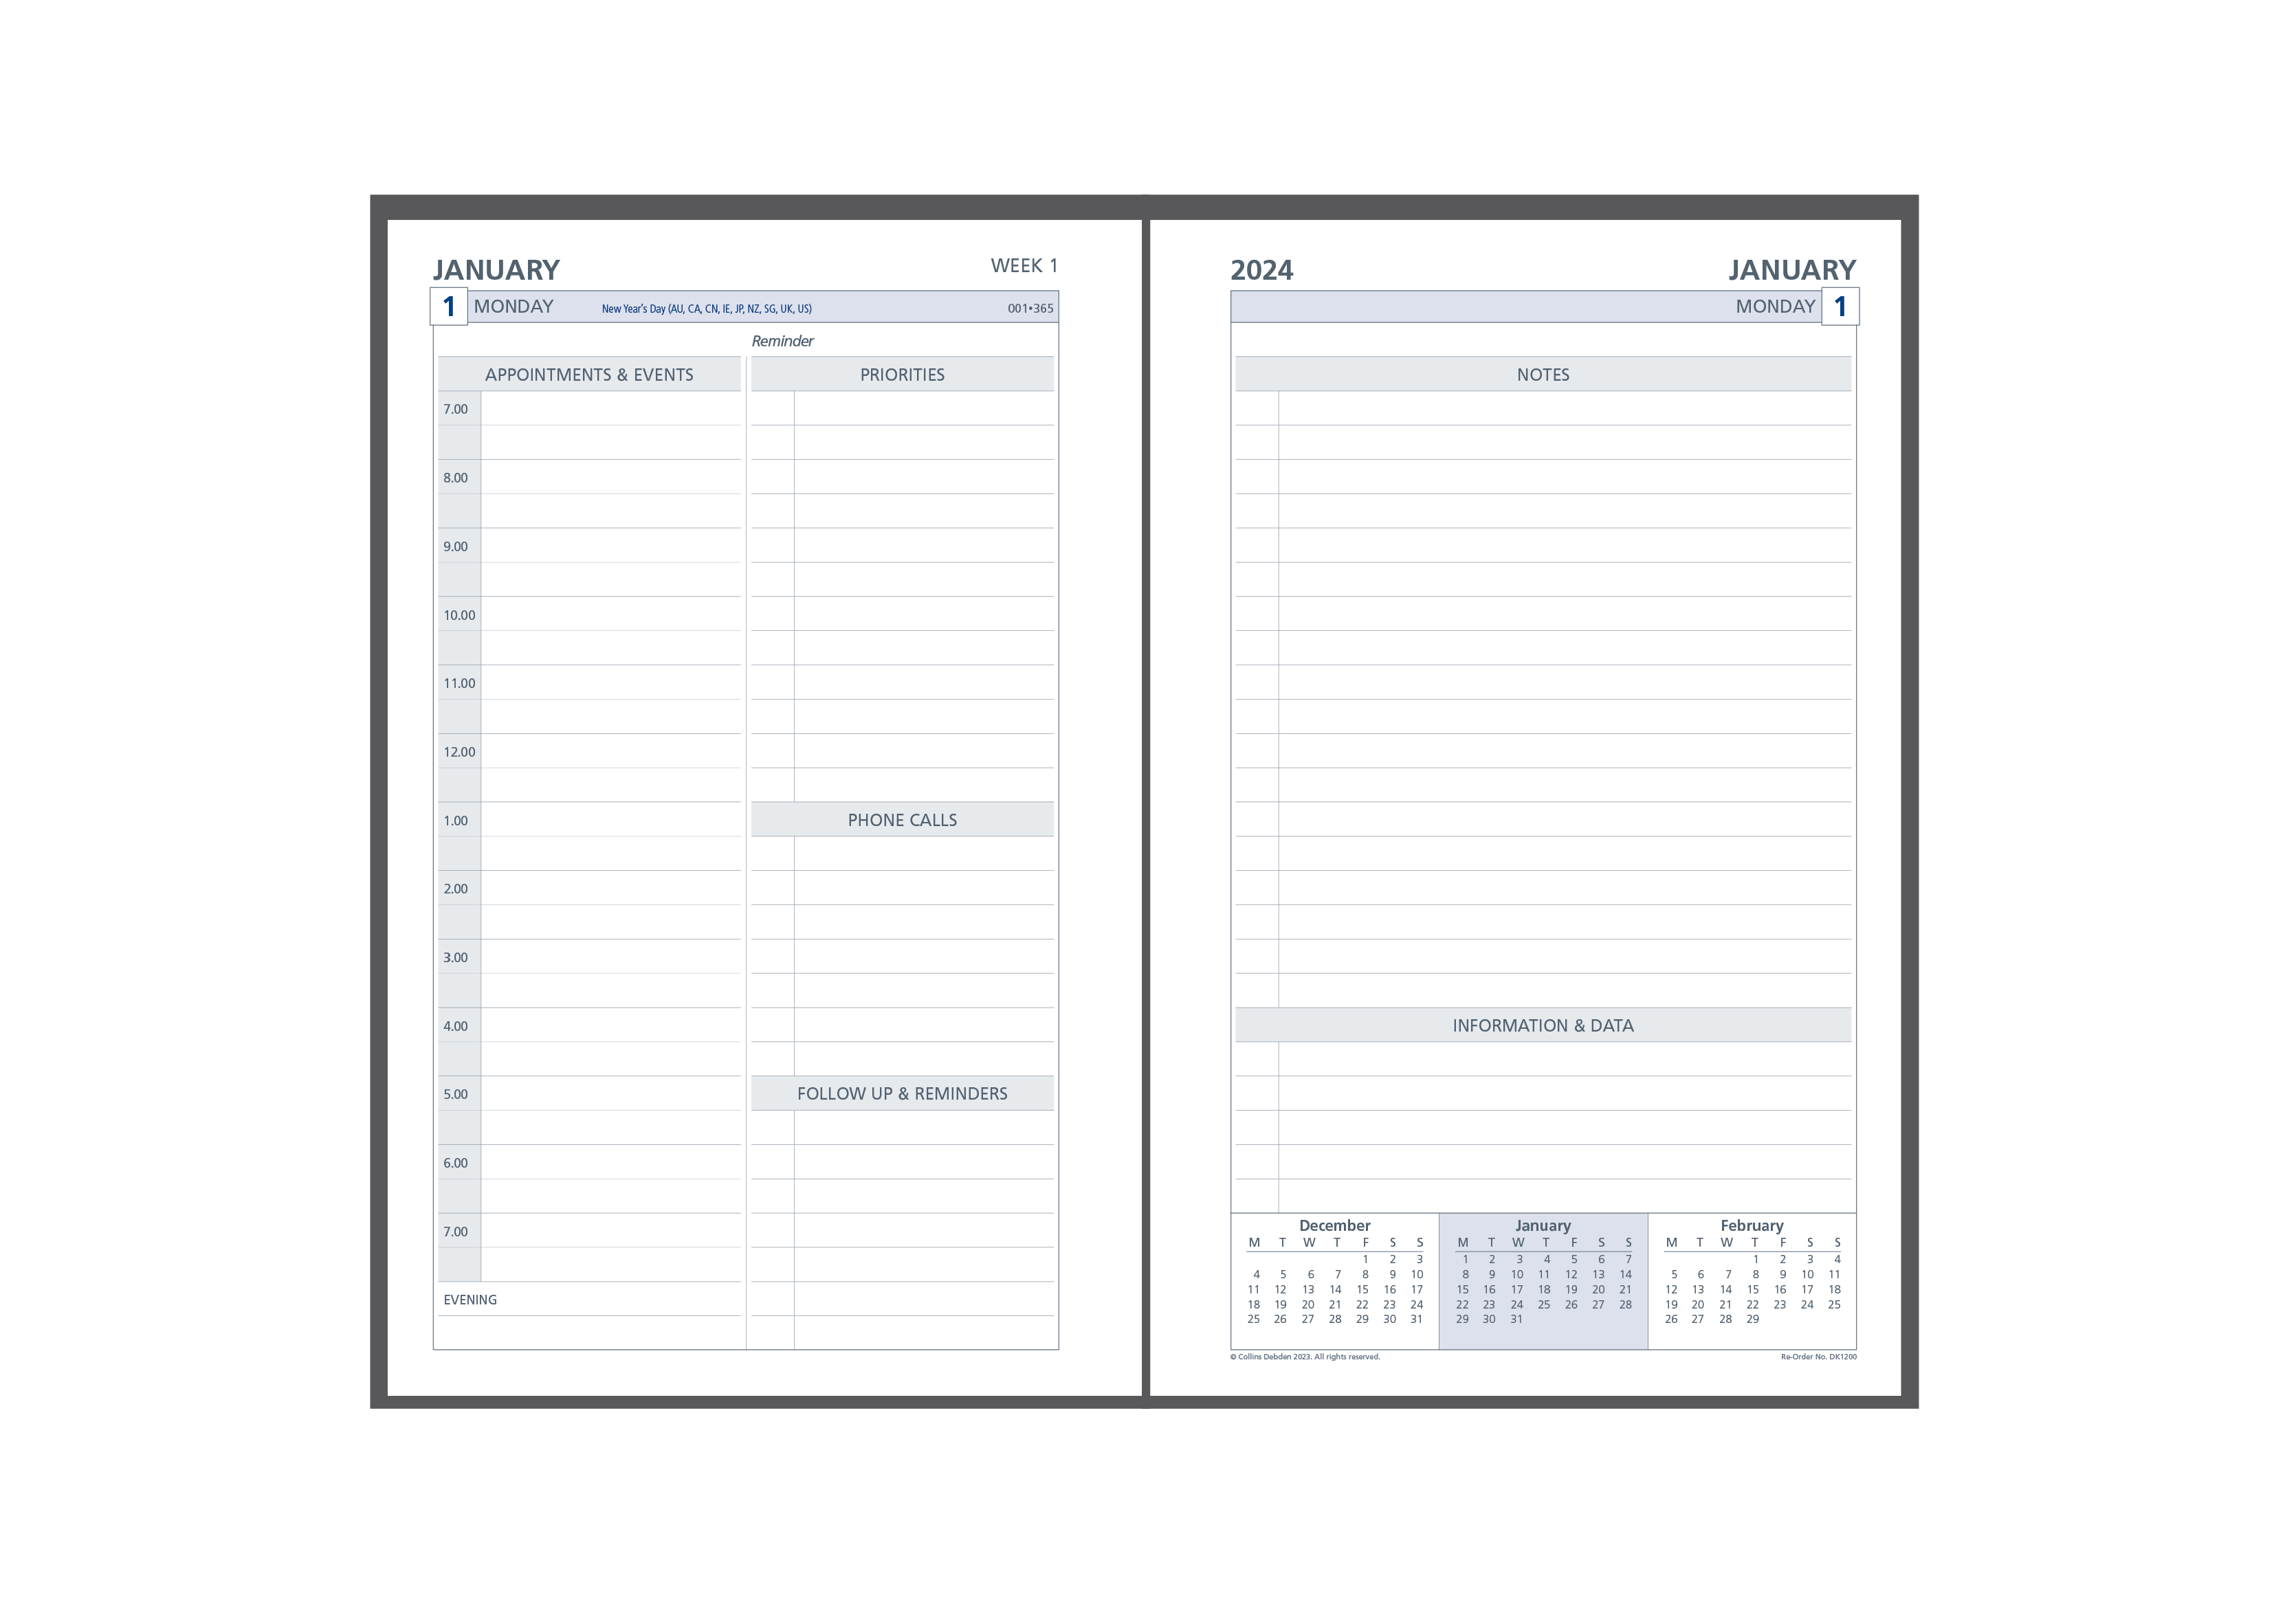 Day Planner Refill 2024 - 2 Pages per Day (one year), Size Desk Desk (216 x 140mm)